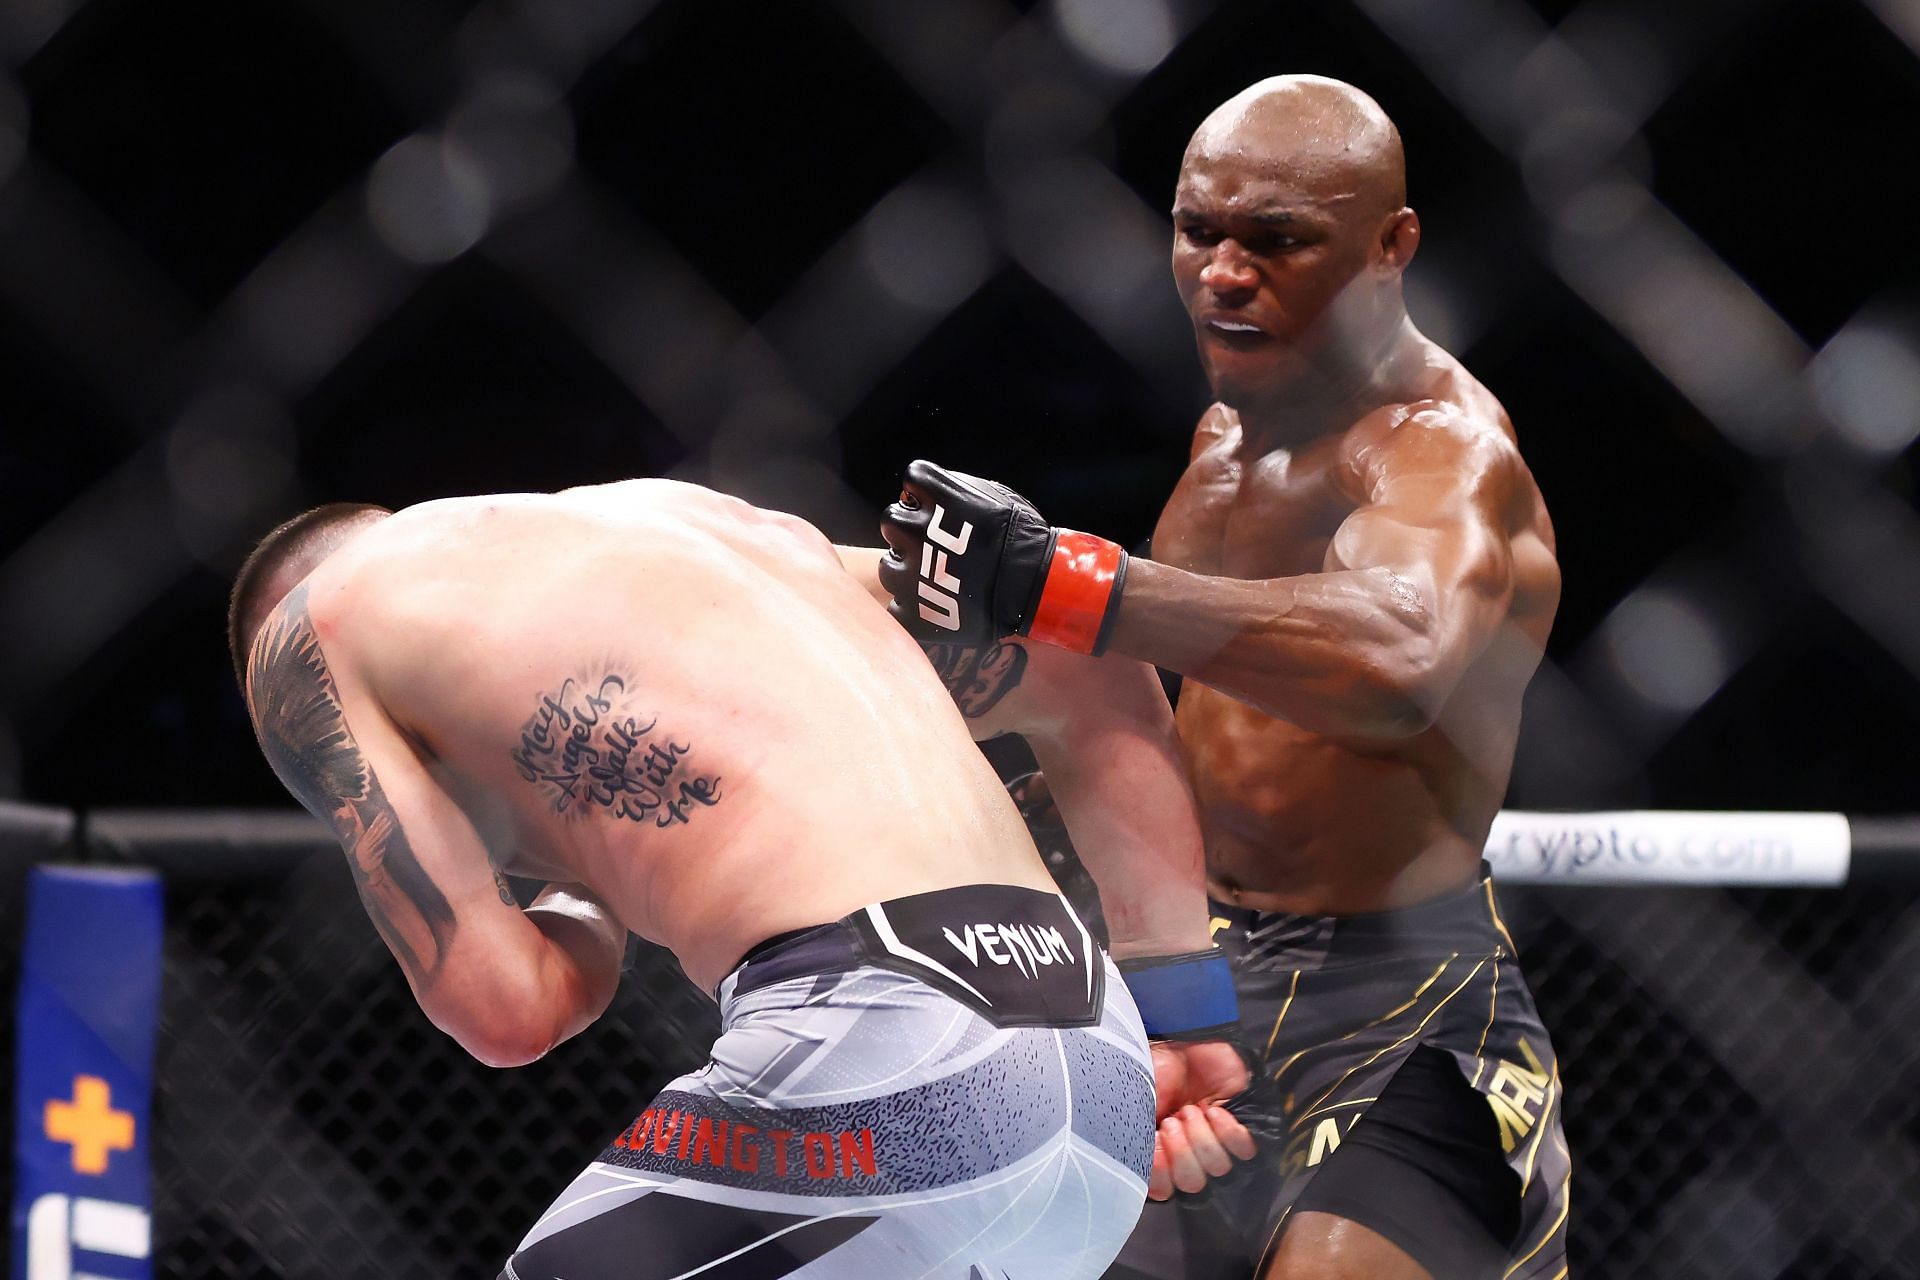 Kamaru Usman defeated Colby Covington for the second time - hopefully ending their rivalry for good